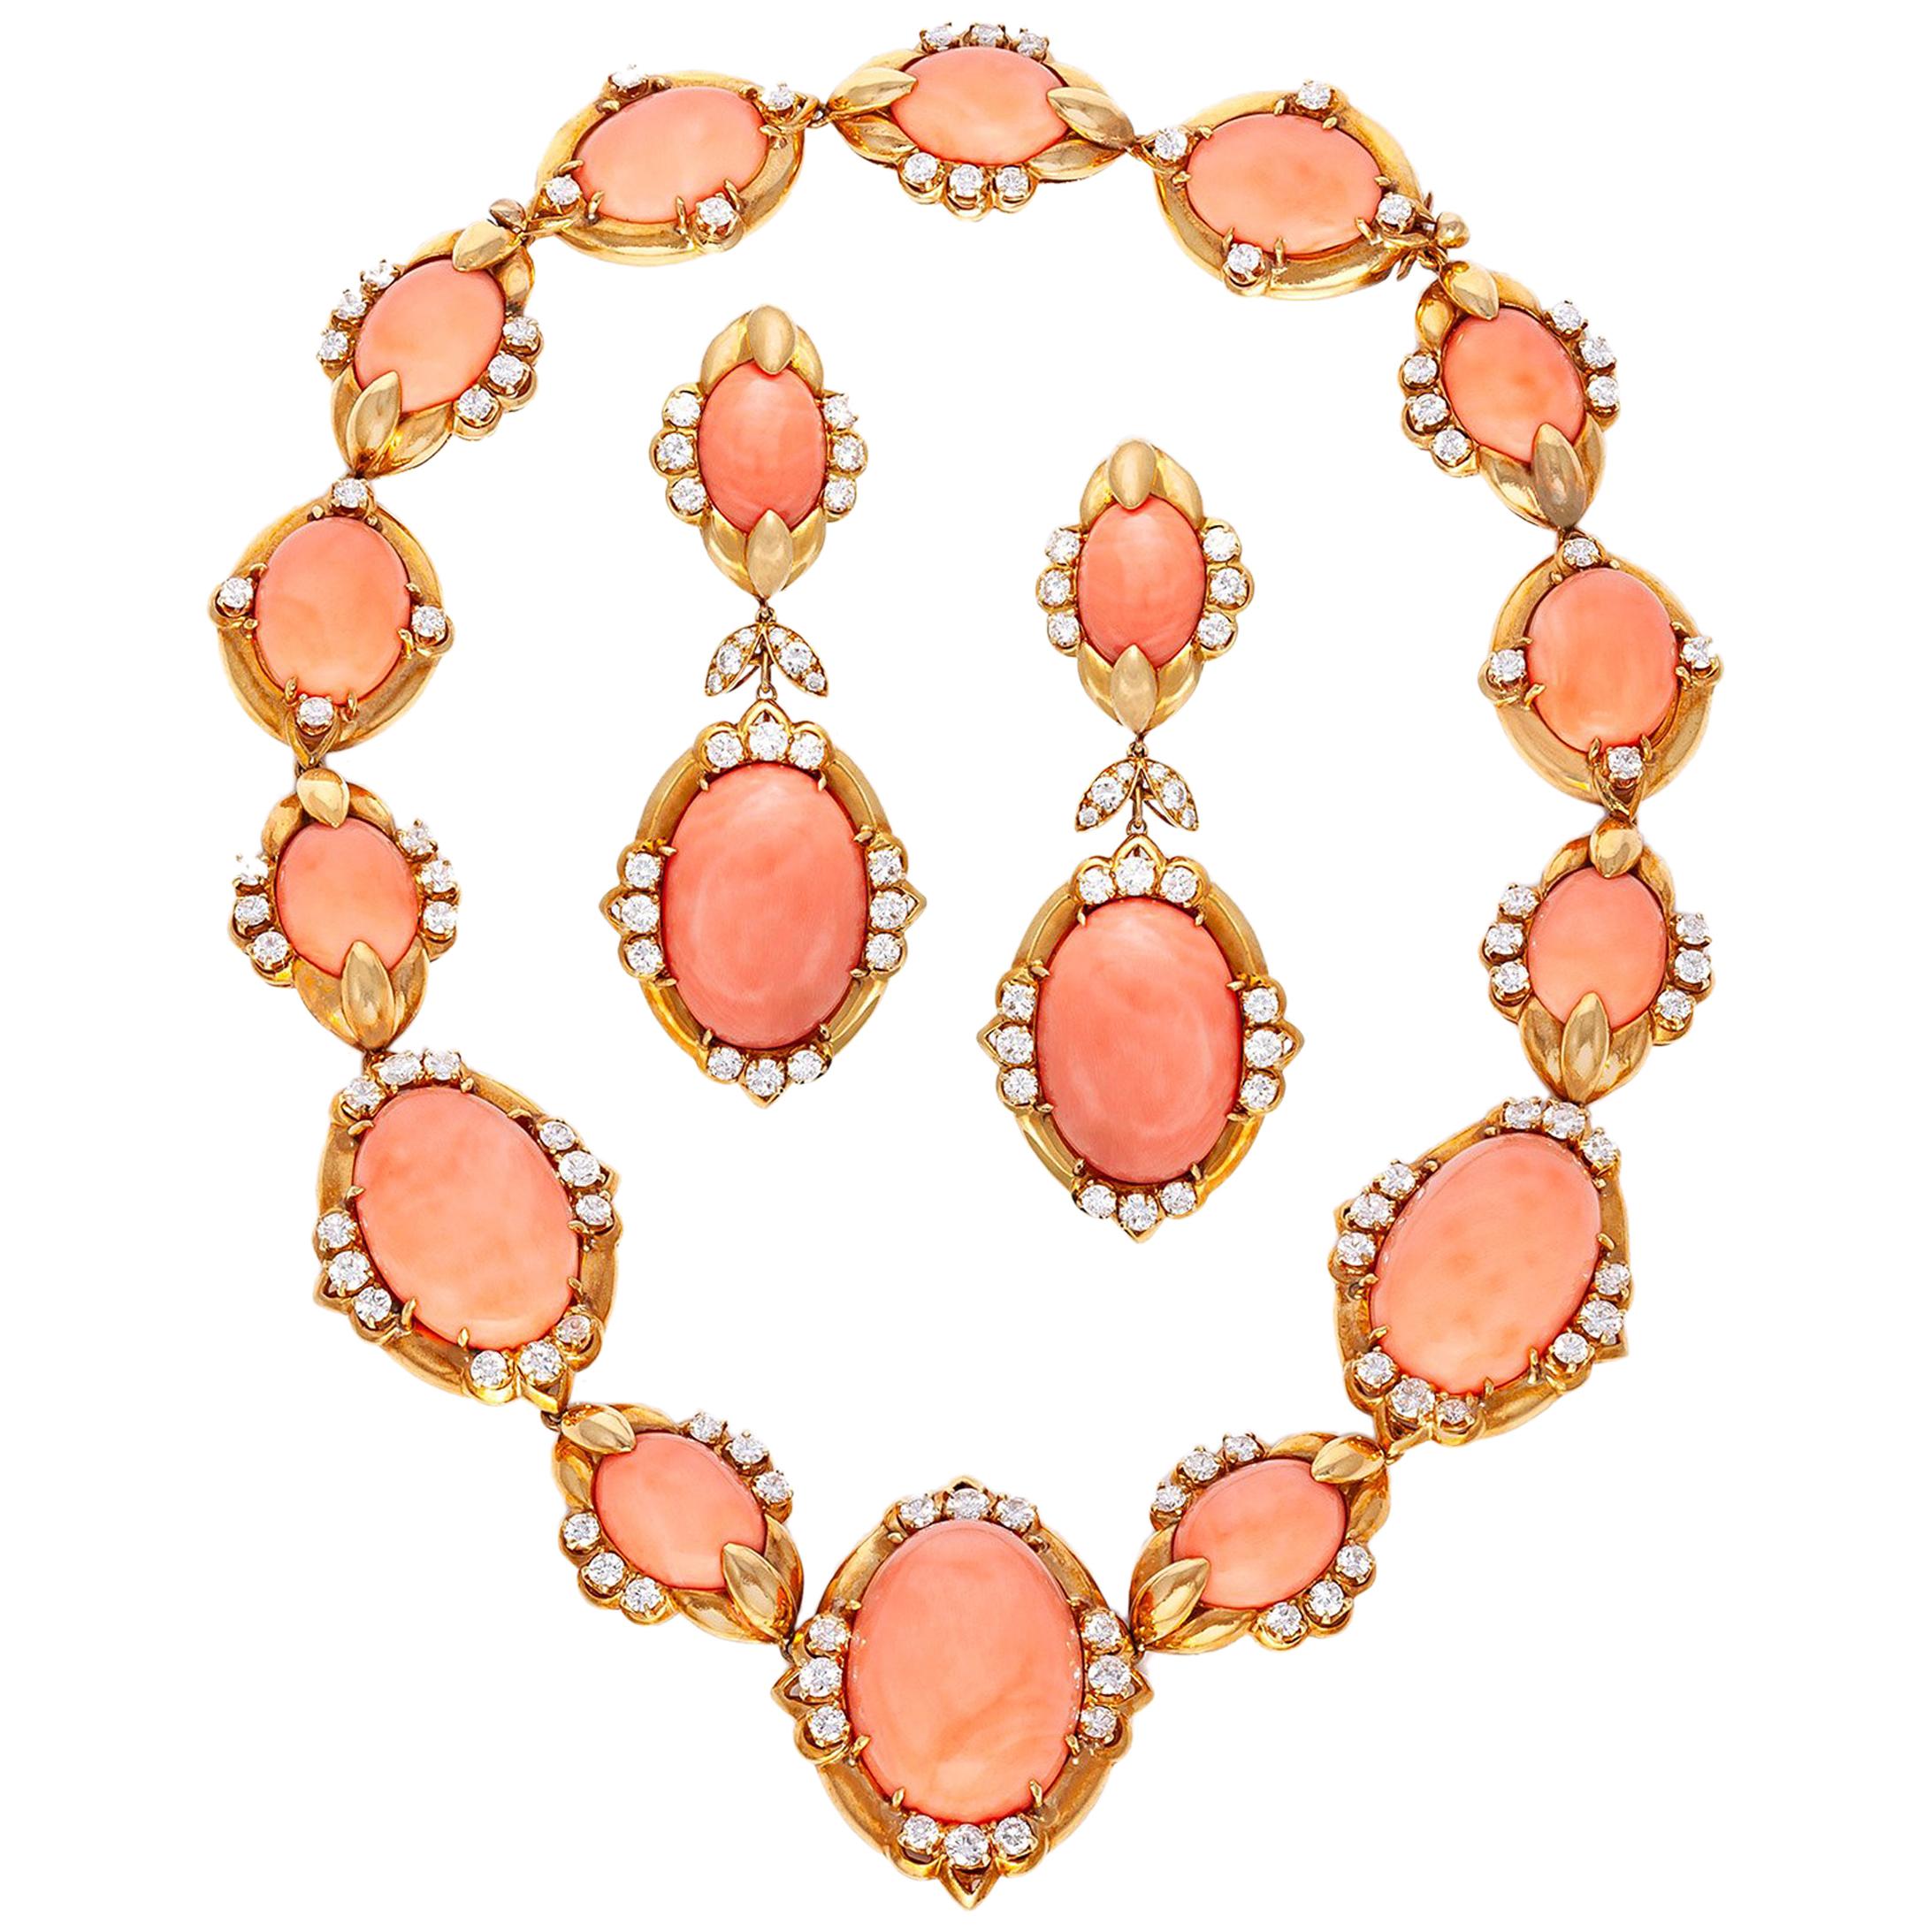 Coral Necklace and Earrings Set